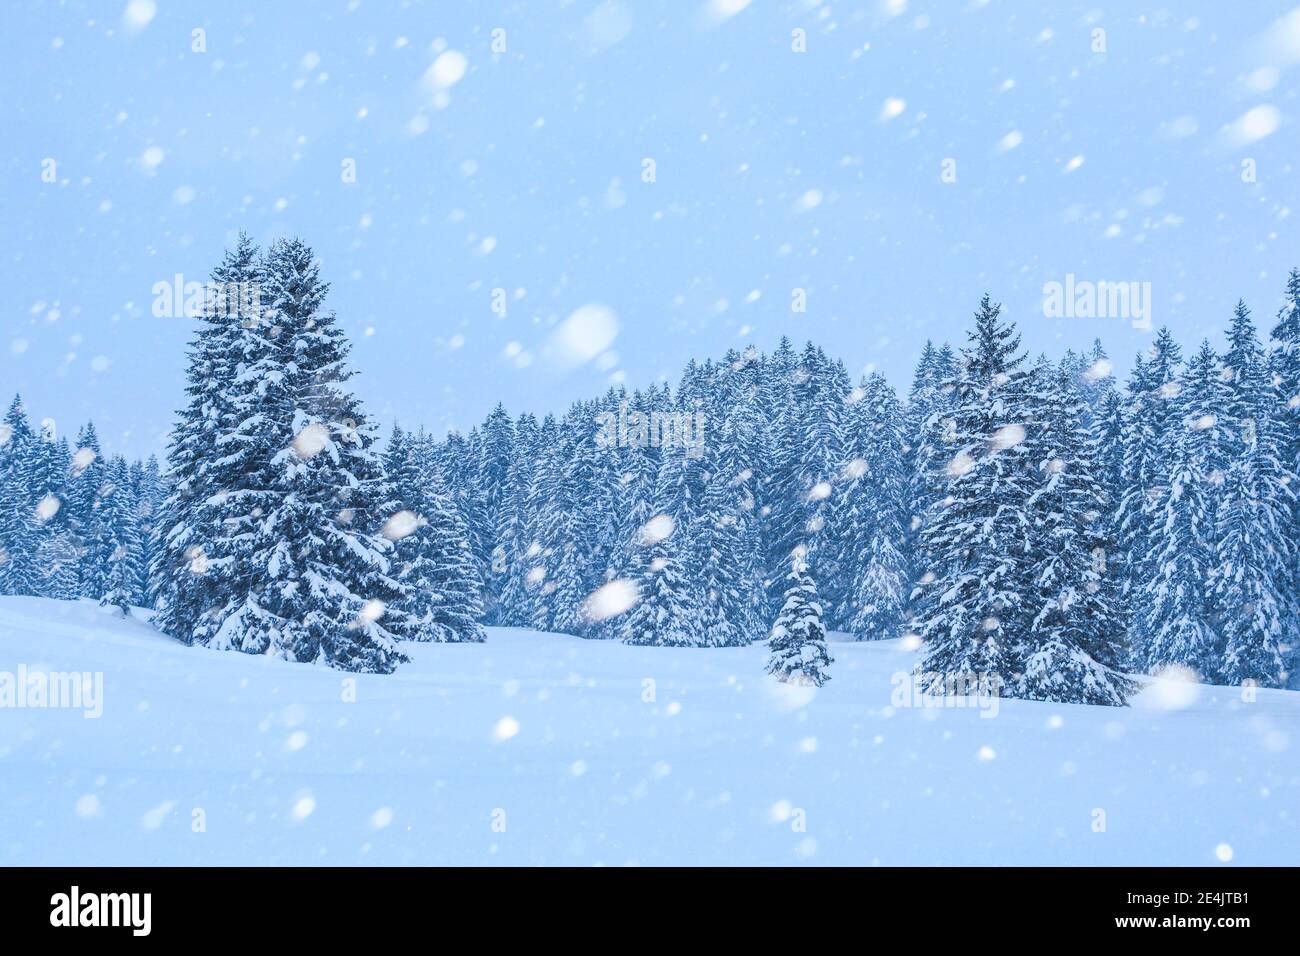 Snow-covered fir trees during snowfall, Switzerland Stock Photo